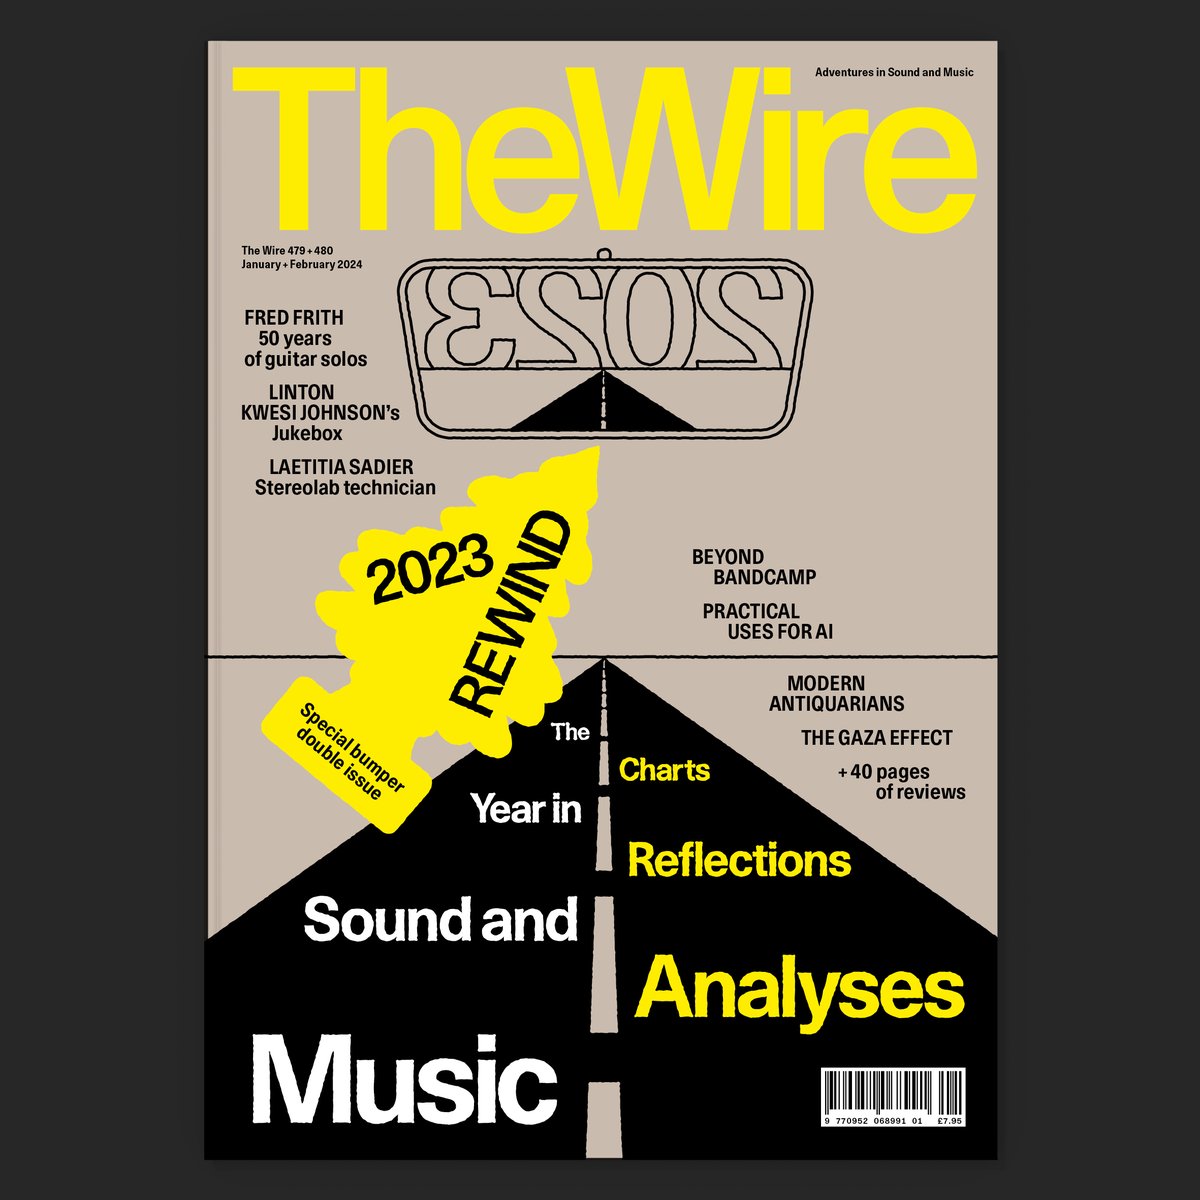 Inside The Wire 479/480: Lisa Ullén The versatile pianist and improvisor brings her adventurous approach to a multitude of projects including solo work and the propulsive trio Space. Read the interview by Peter Margasak inside our current issue: thewire.co.uk/issues/479/480